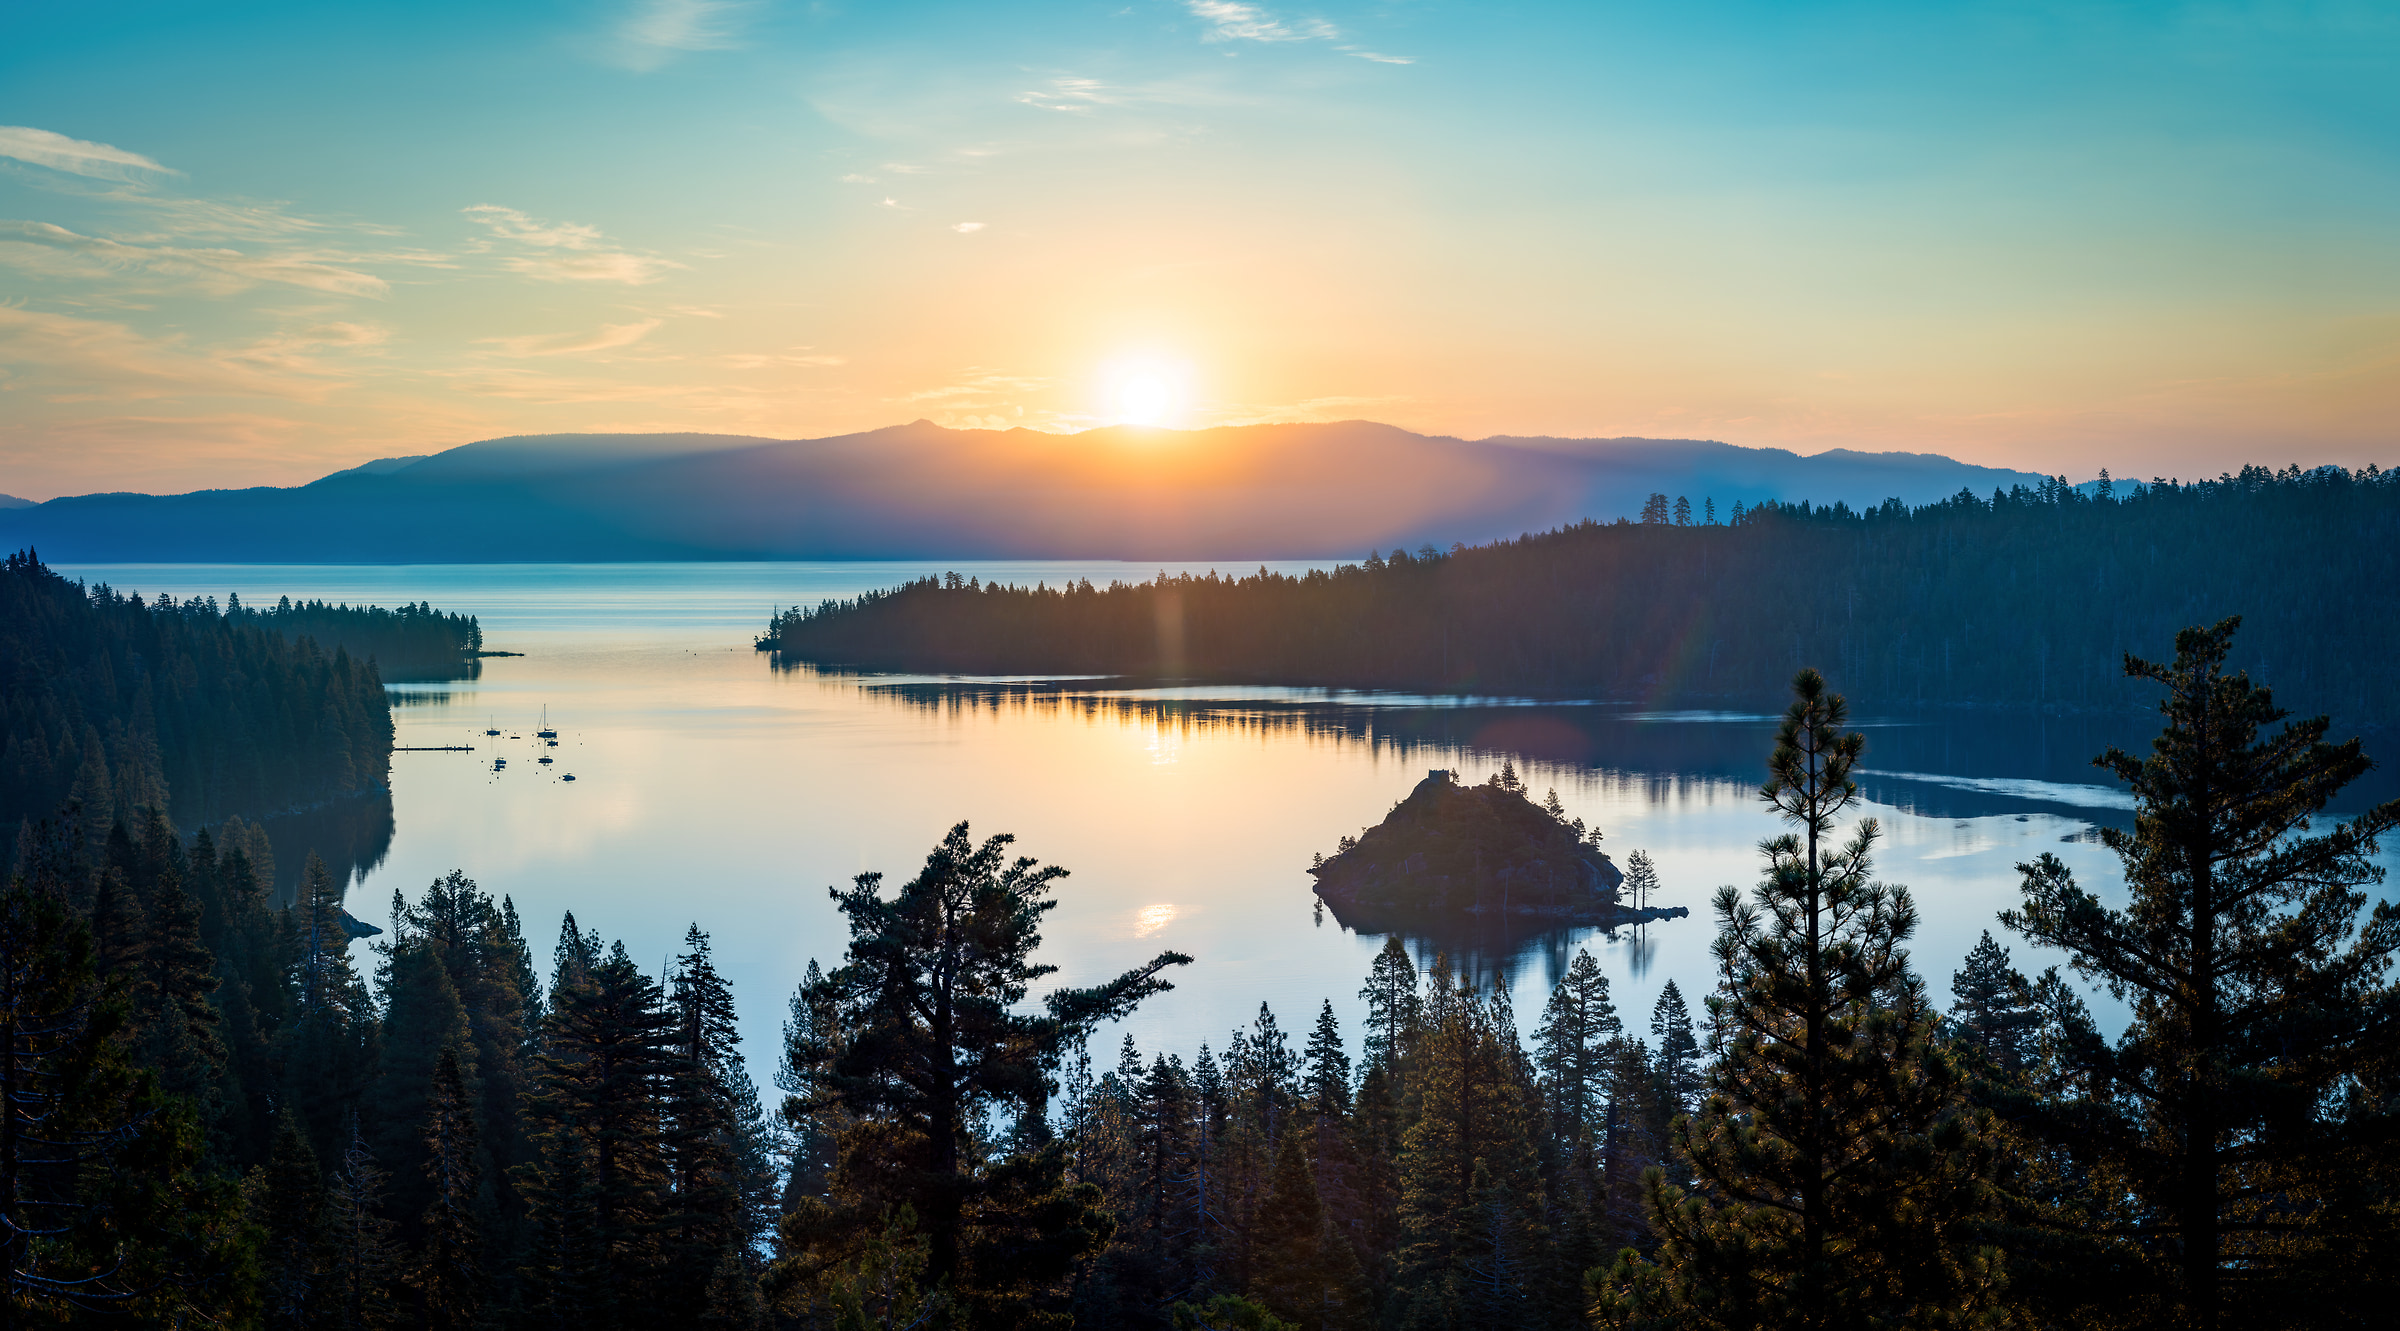 471 megapixels! A very high resolution, large-format VAST photo print of a sunrise over a lake; landscape photograph created by Justin Katz in Emerald Bay, Lake Tahoe, California.